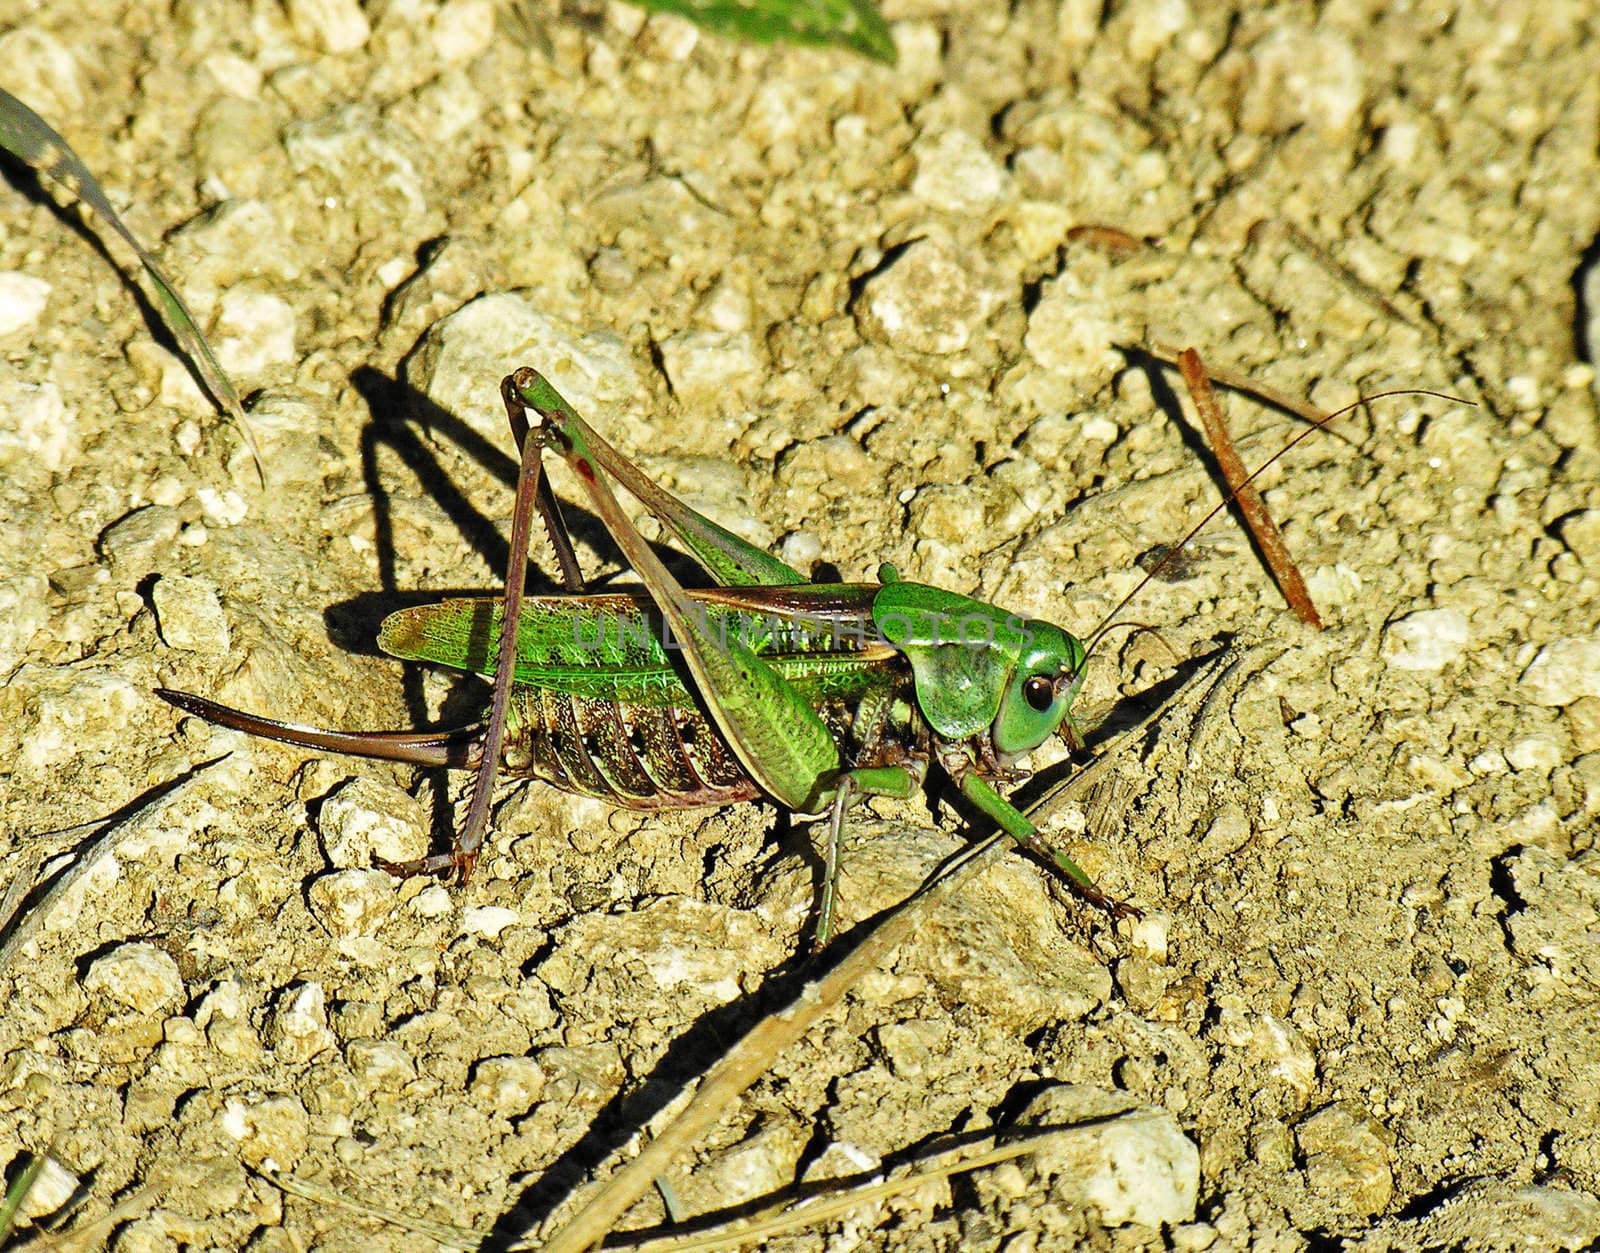 The green grasshopper is photographed close-up